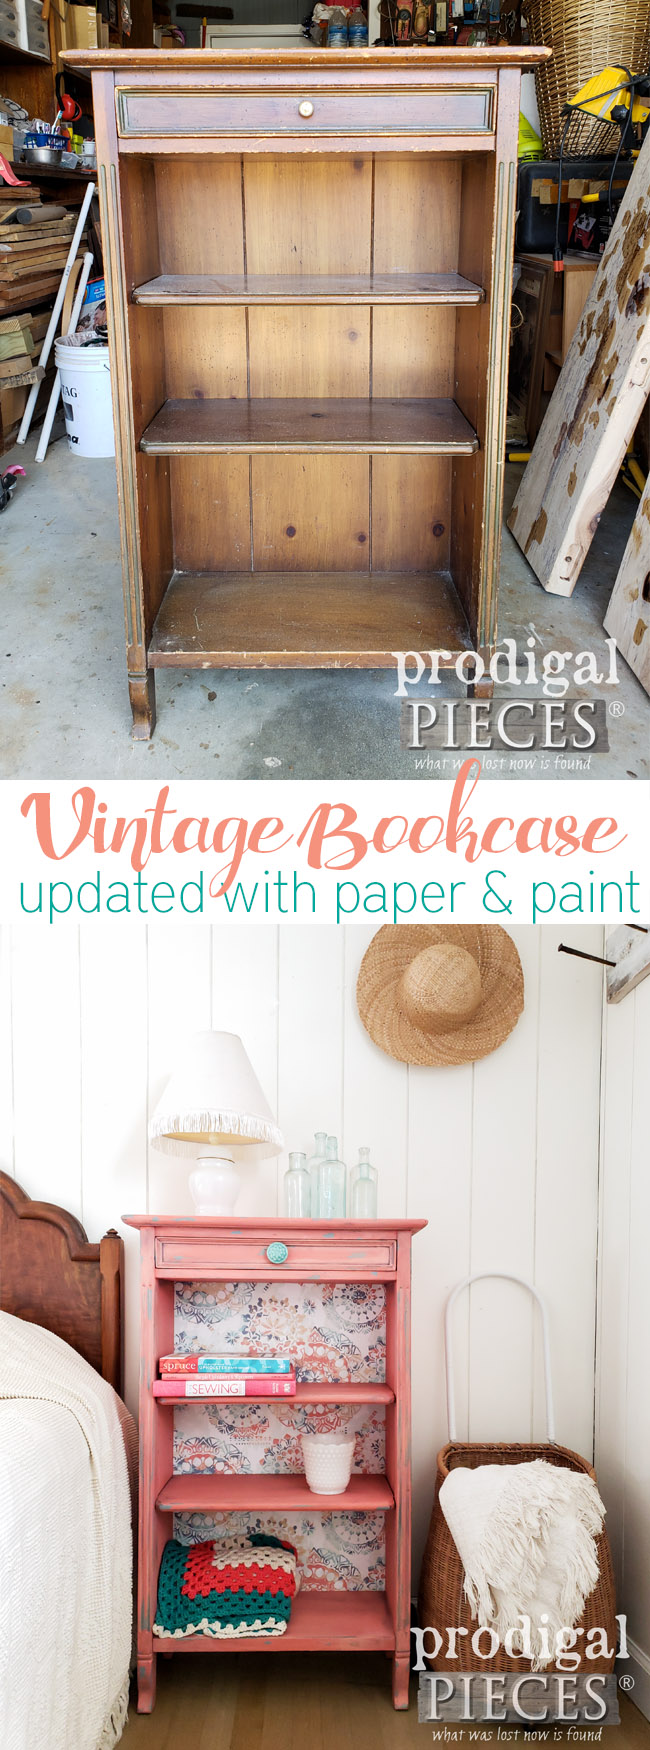 Look how fun! Larissa of Prodigal Pieces gave her updated bookcase a paint & paper makeover for a Boho style DIY project. Easy to do with the HomeRight Super Finish Max paint sprayer. Come see at prodigalpieces.com #prodigalpieces #homedecor #furniture #shopping